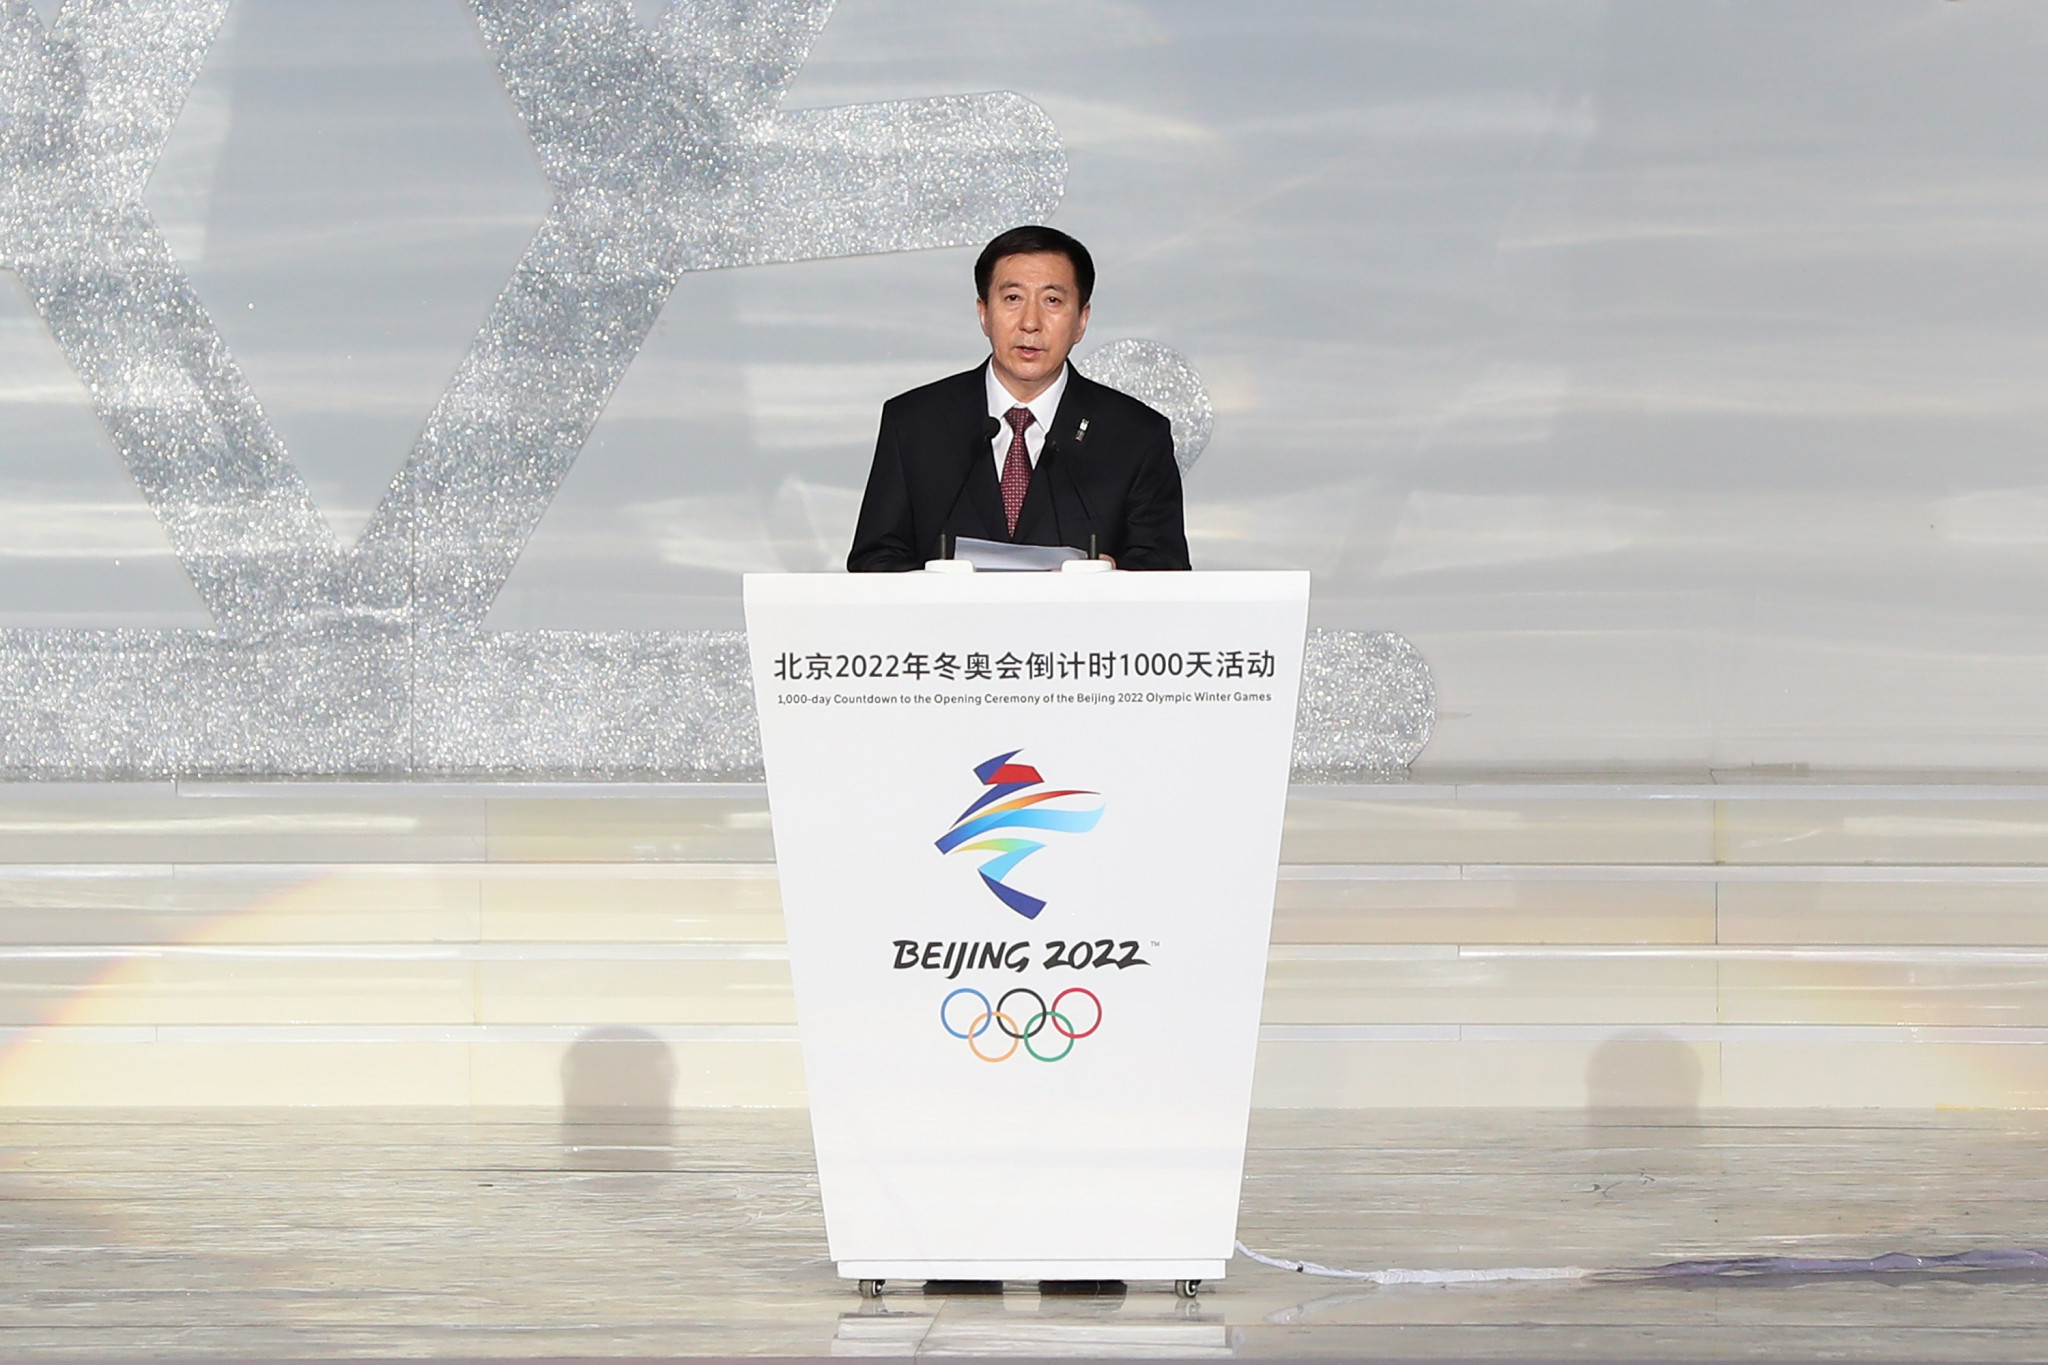 IOC reiterates coronavirus support in video conference with Beijing 2022